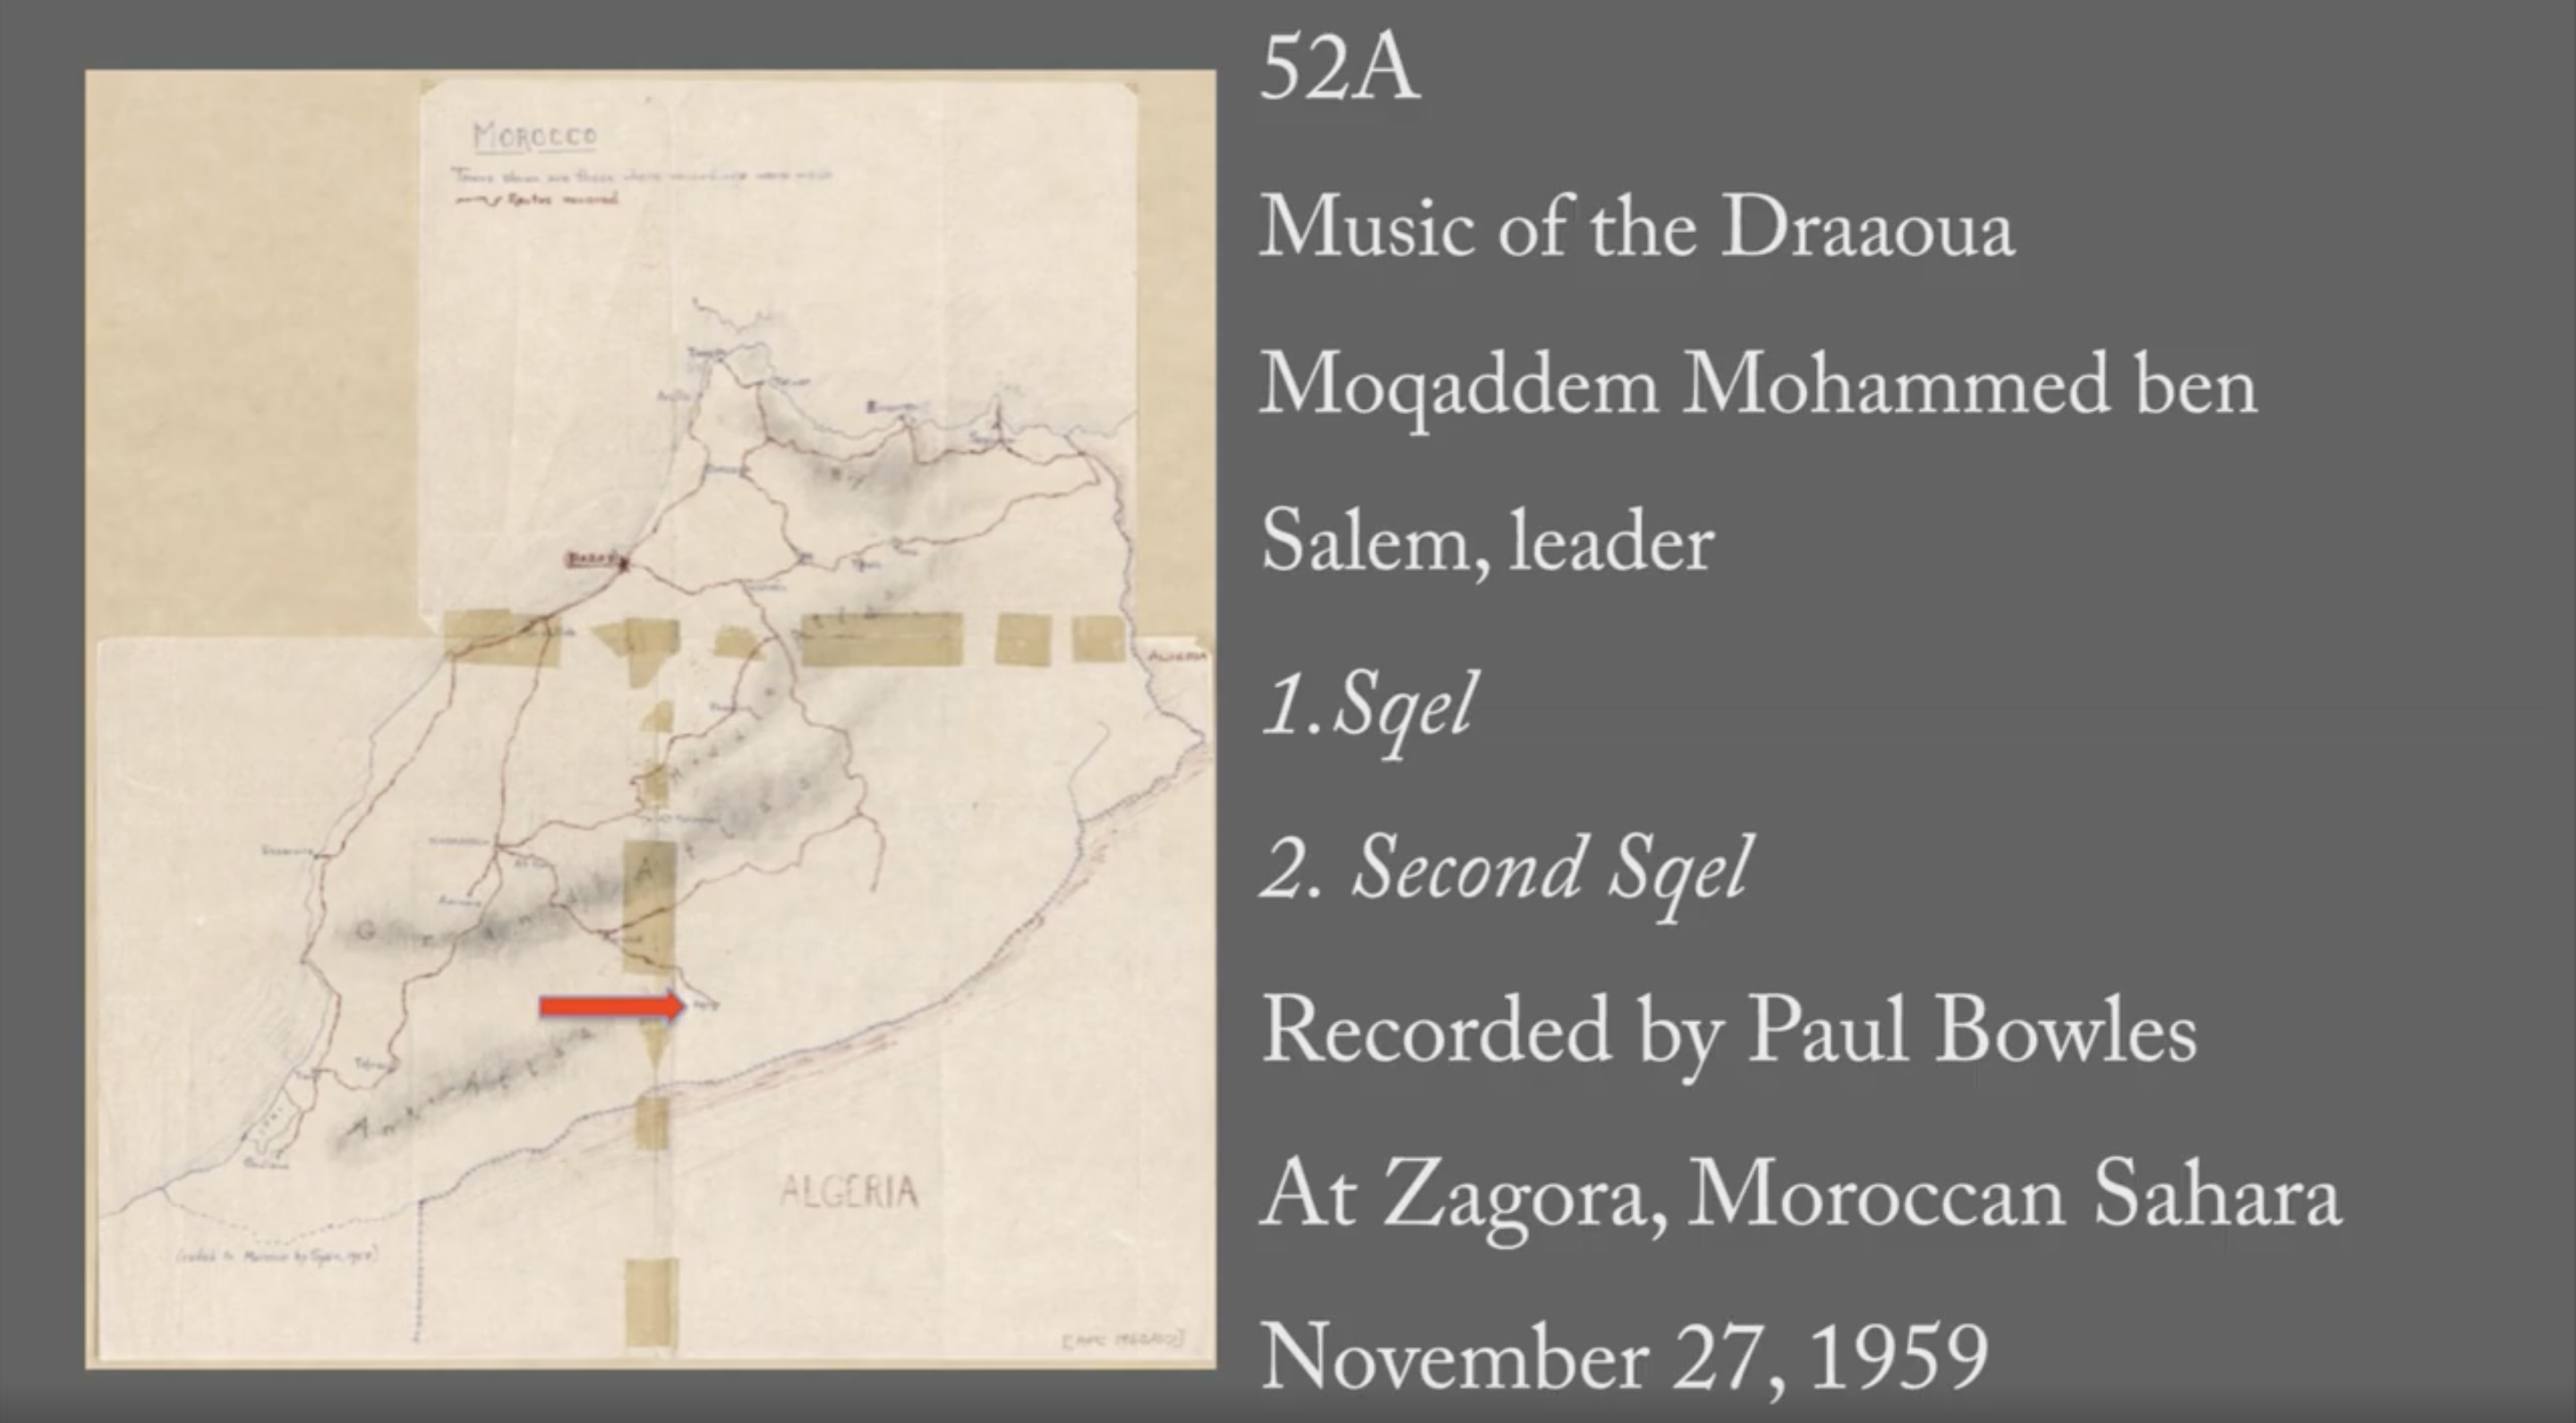  Zagora - 52A: "Sqel and Second Sqel" (Music of the Draaou)